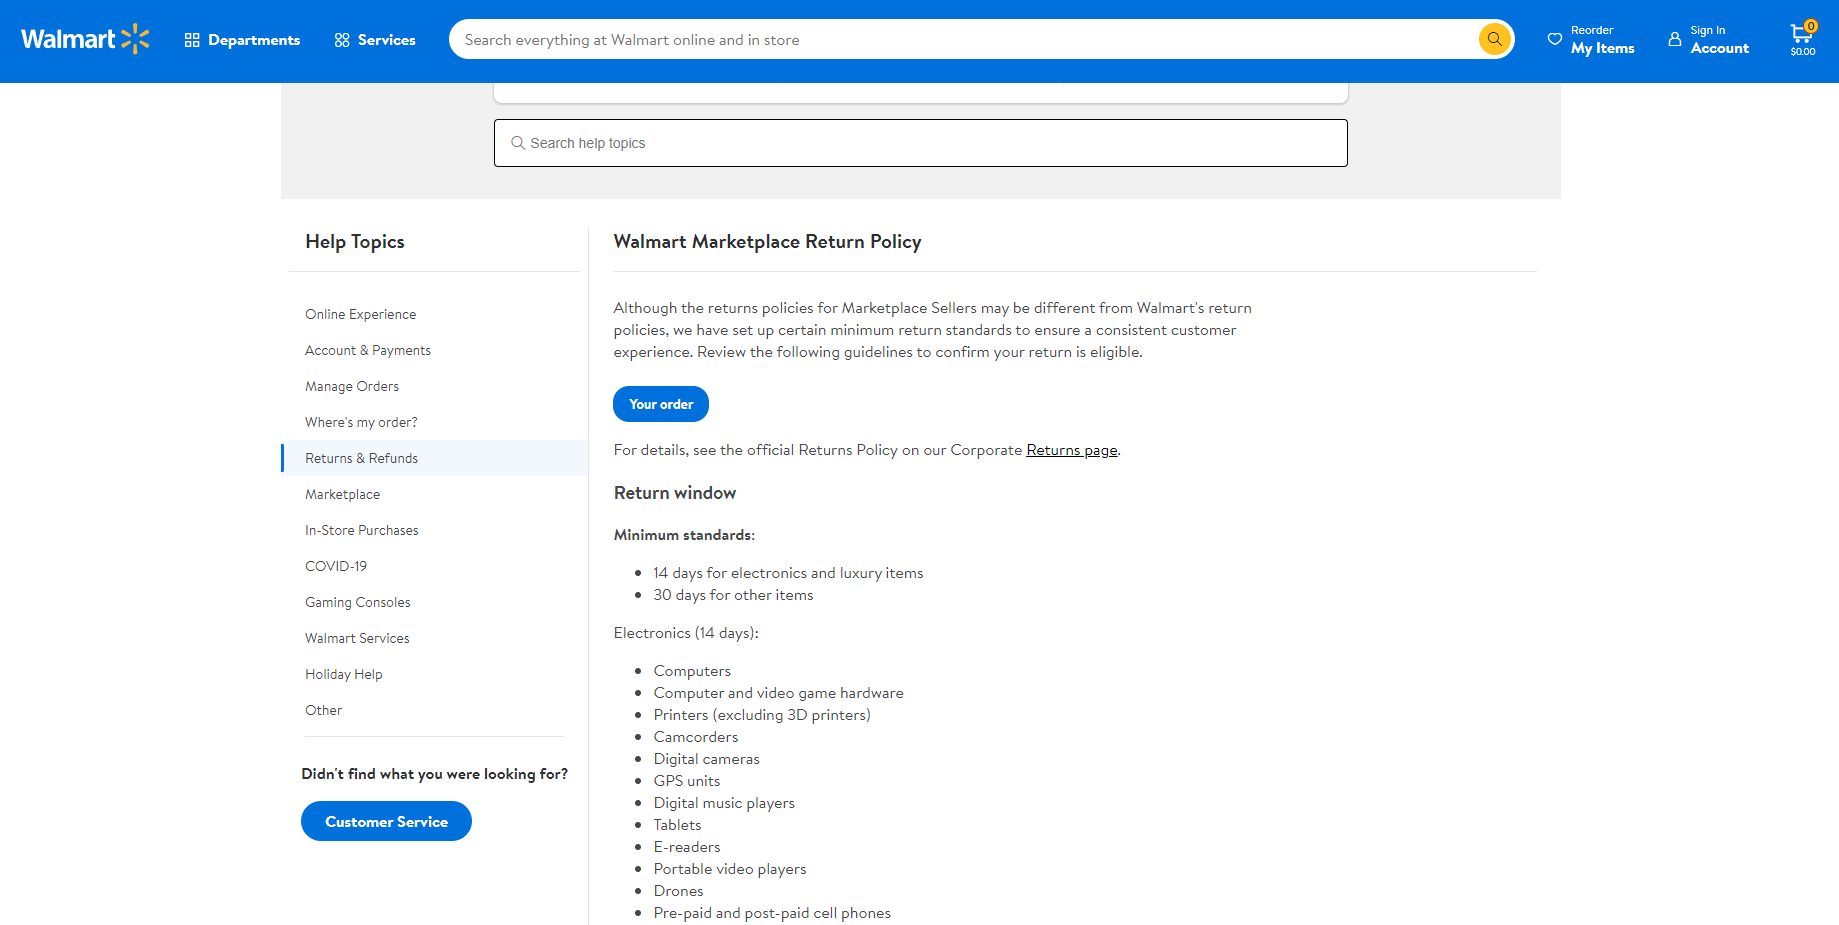 How to manage returns & refunds on Walmart marketplace